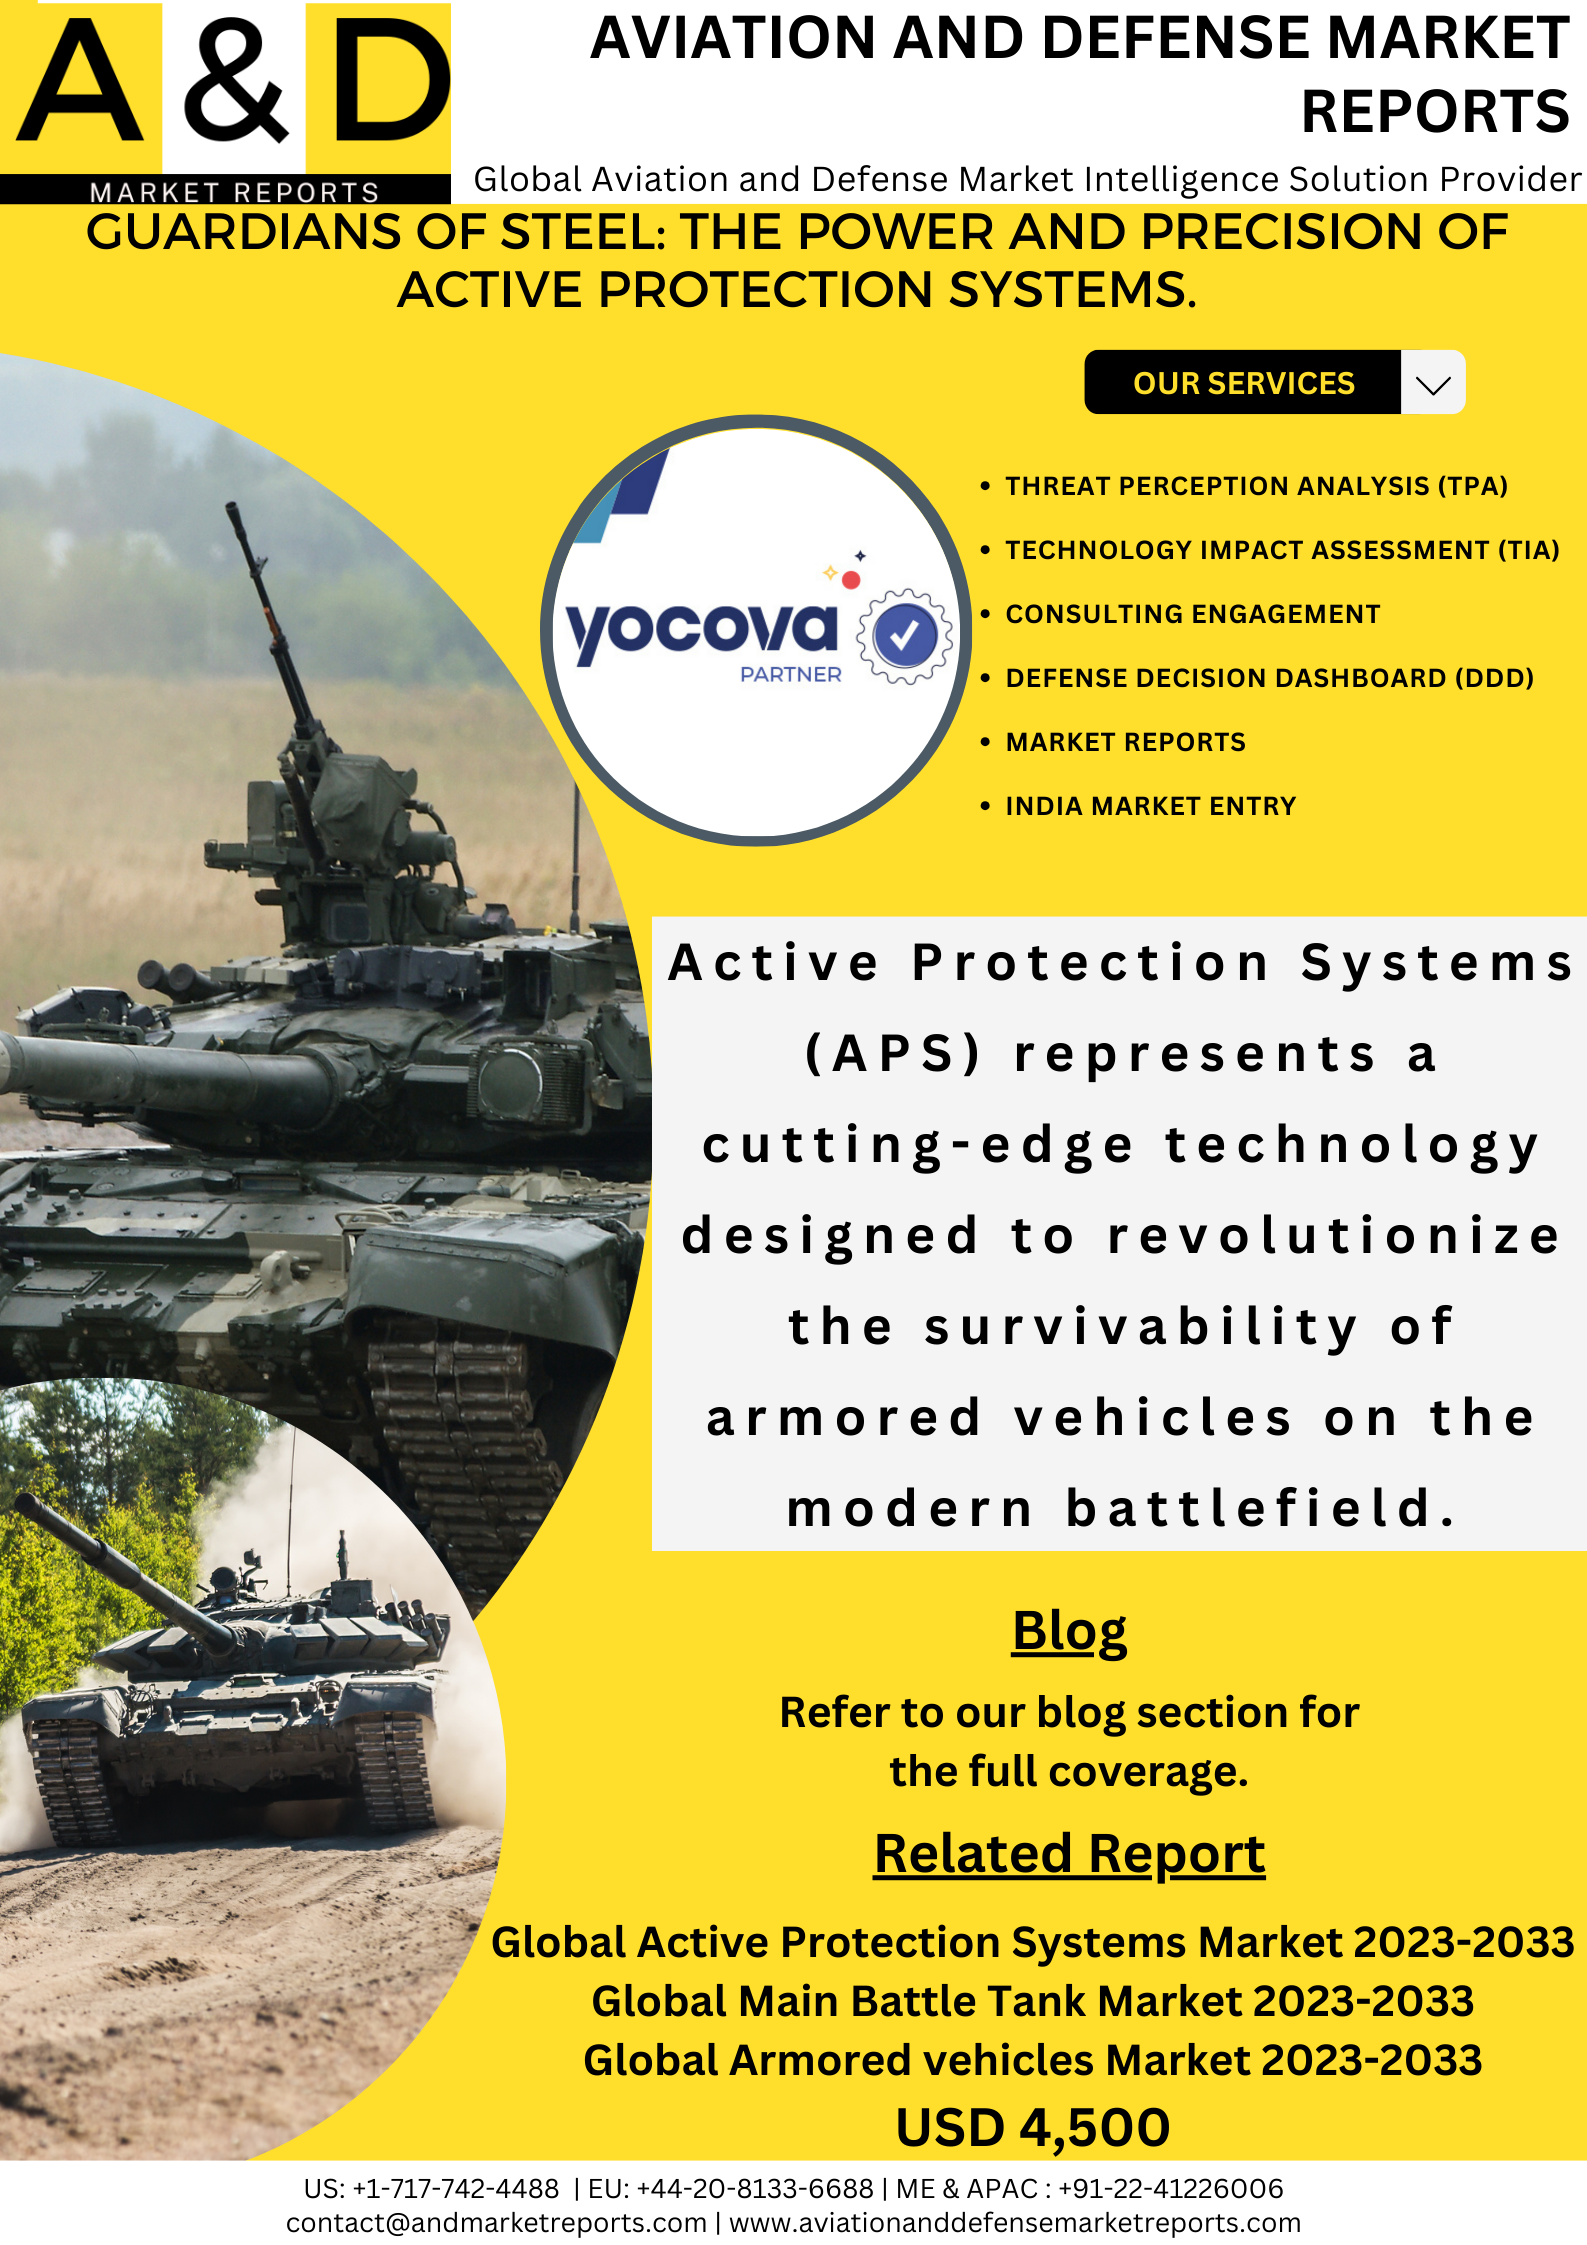 GUARDIANS OF STEEL: The Power And Precision Of Active Protection Systems